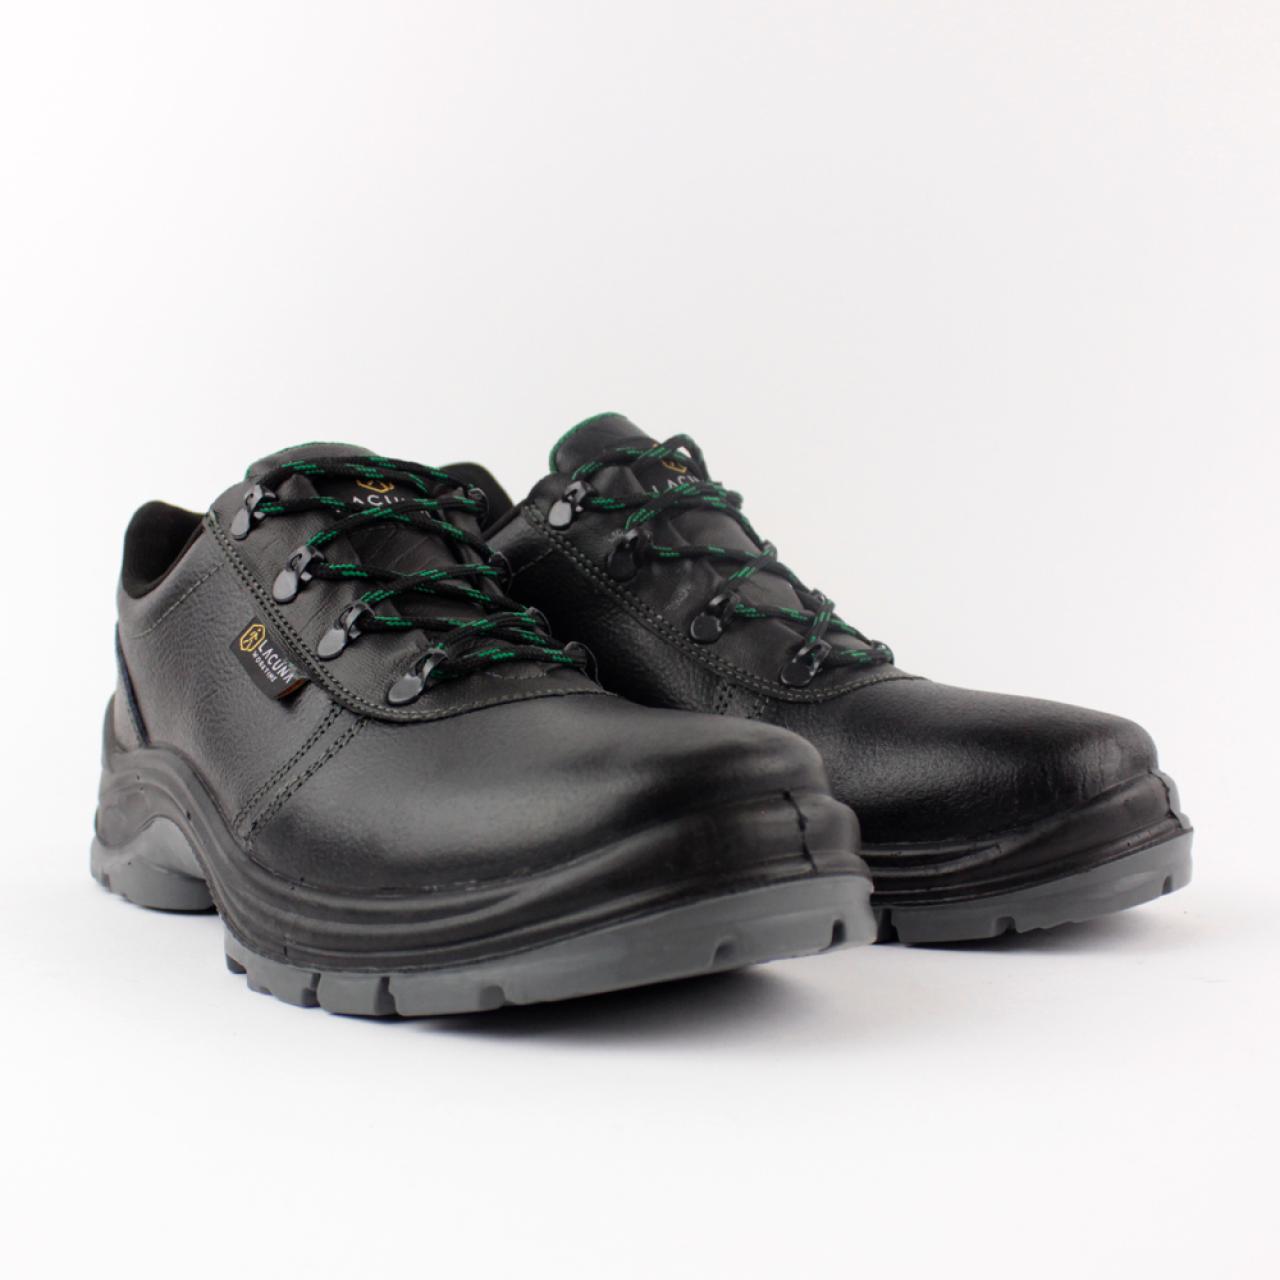 STRONG O2 low top work shoe - Pharsol Protect - Workwear